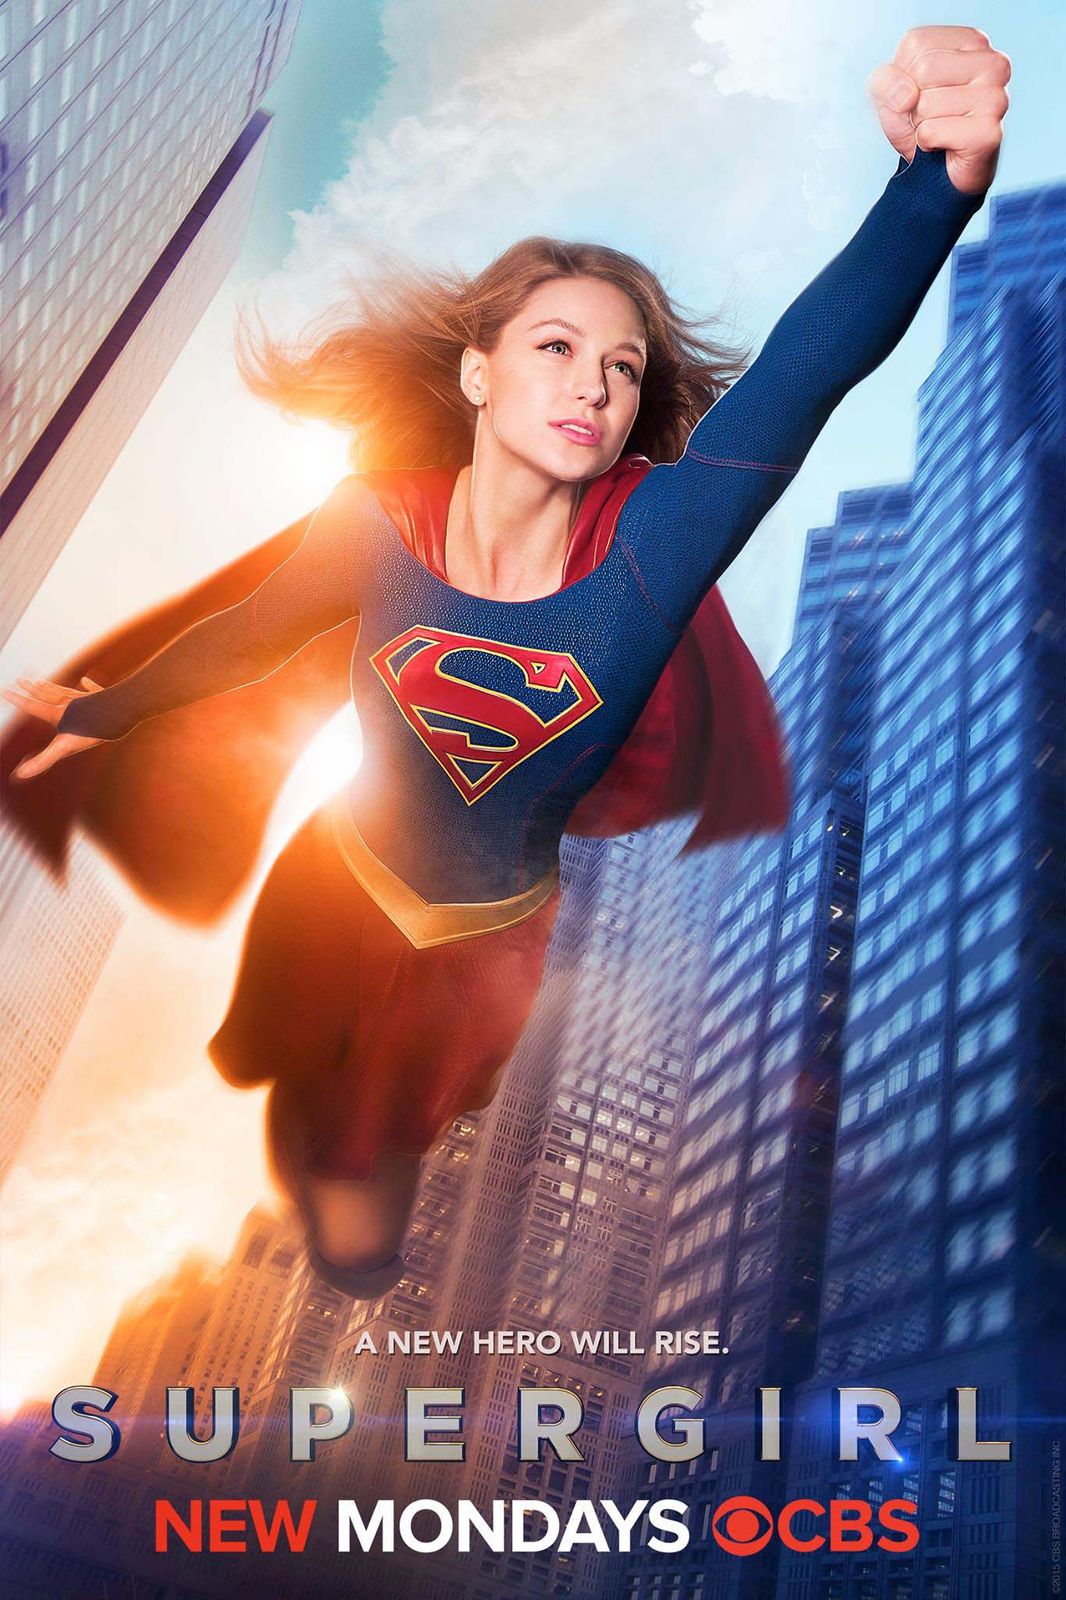 Supergirl Flying High in New Poster